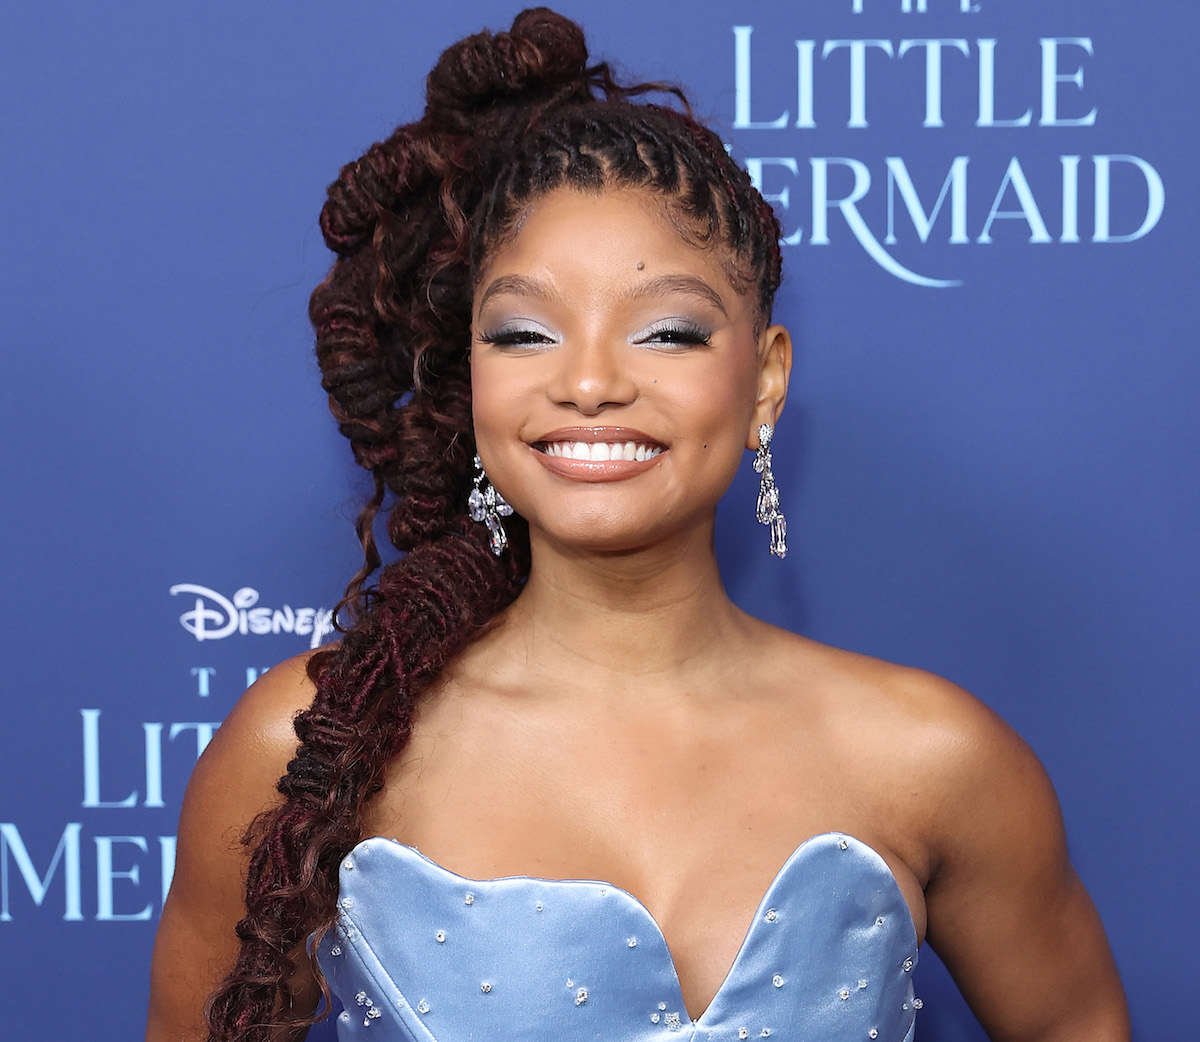 Halle Bailey Discusses Body Imperfections on Instagram